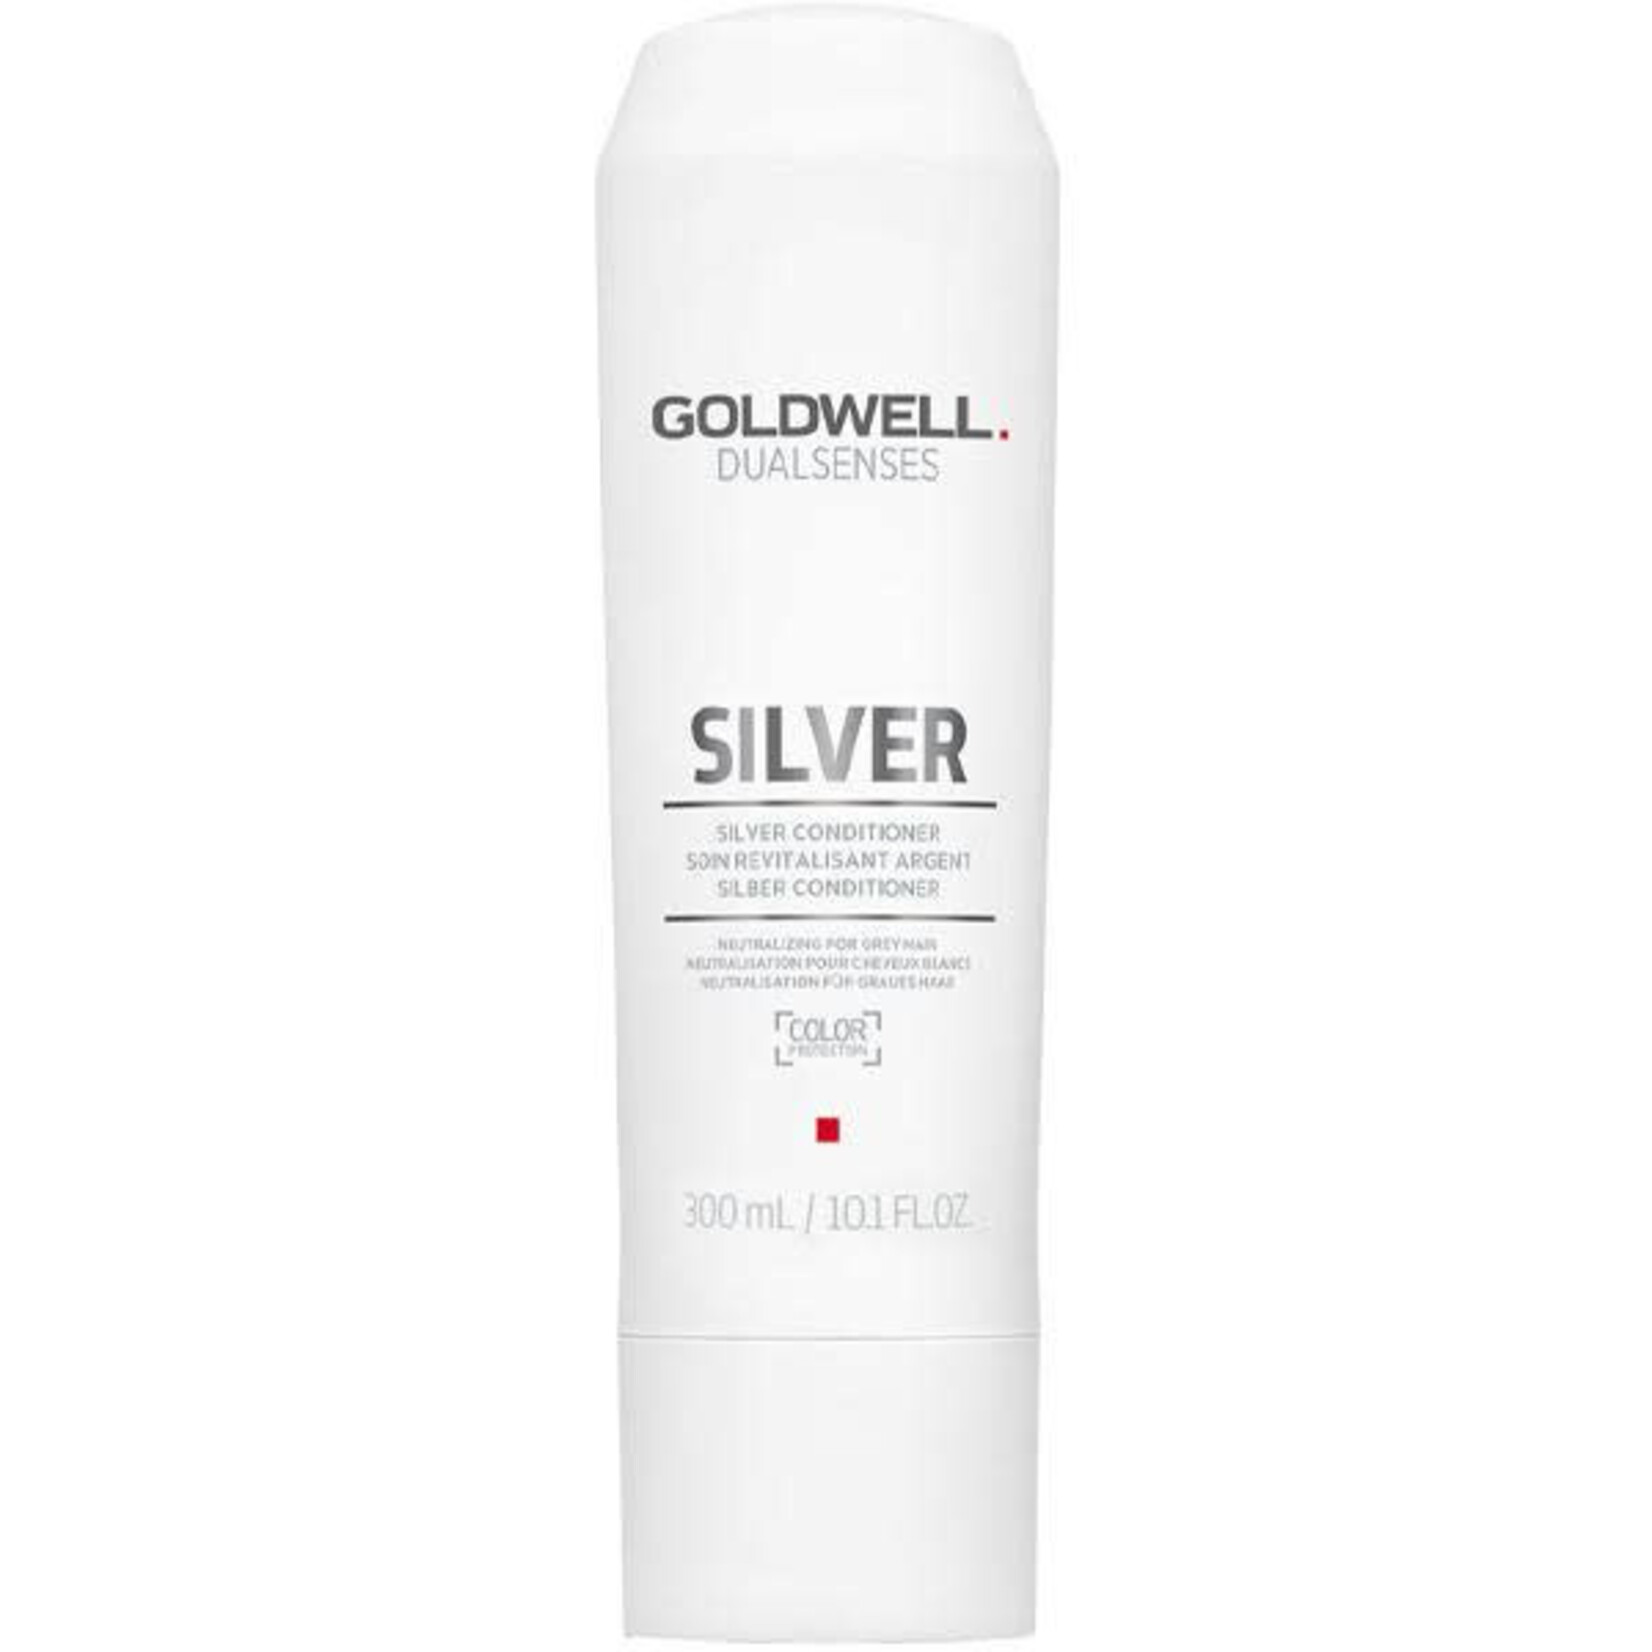 Goldwell Goldwell - Dualsenses - Silver - Silver Conditioner 300ml